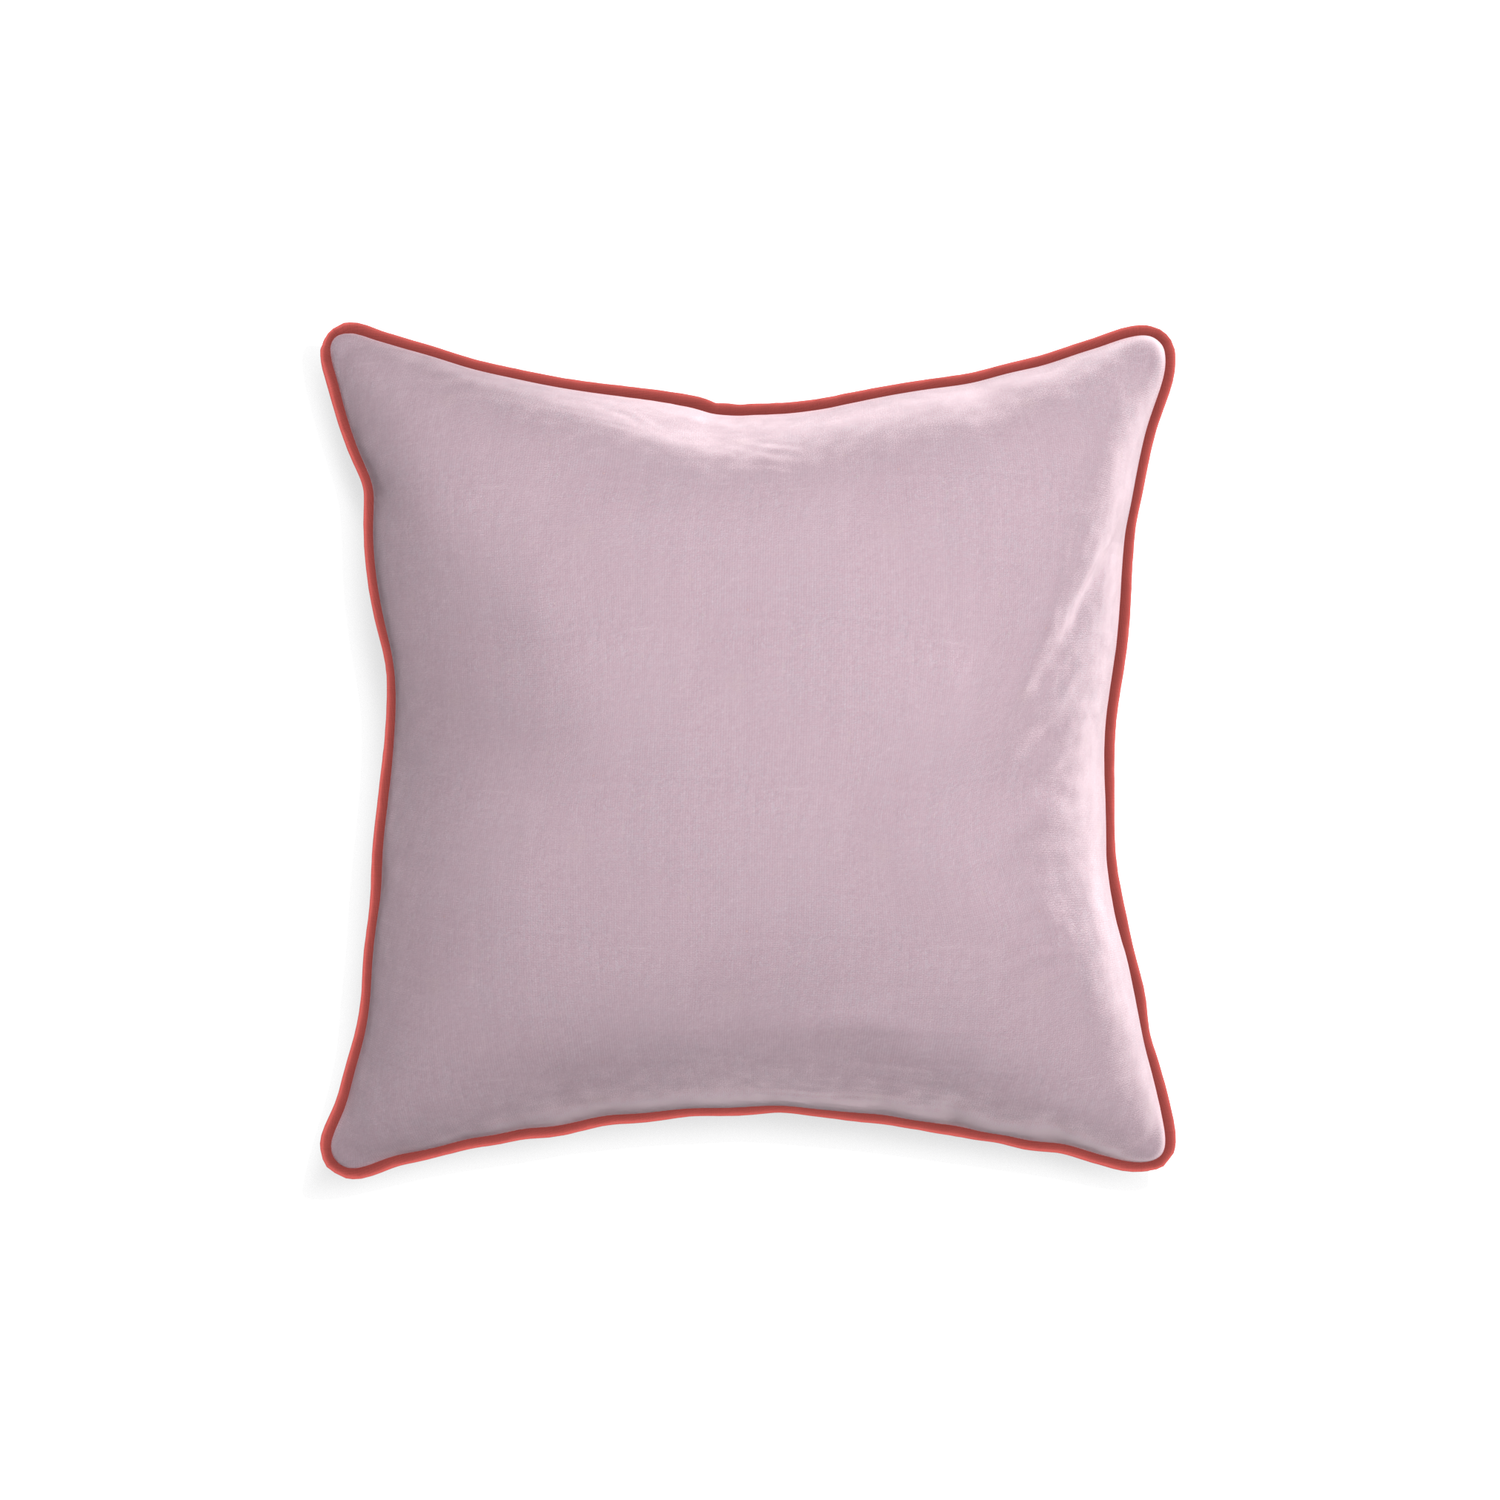 18-square lilac velvet custom pillow with c piping on white background